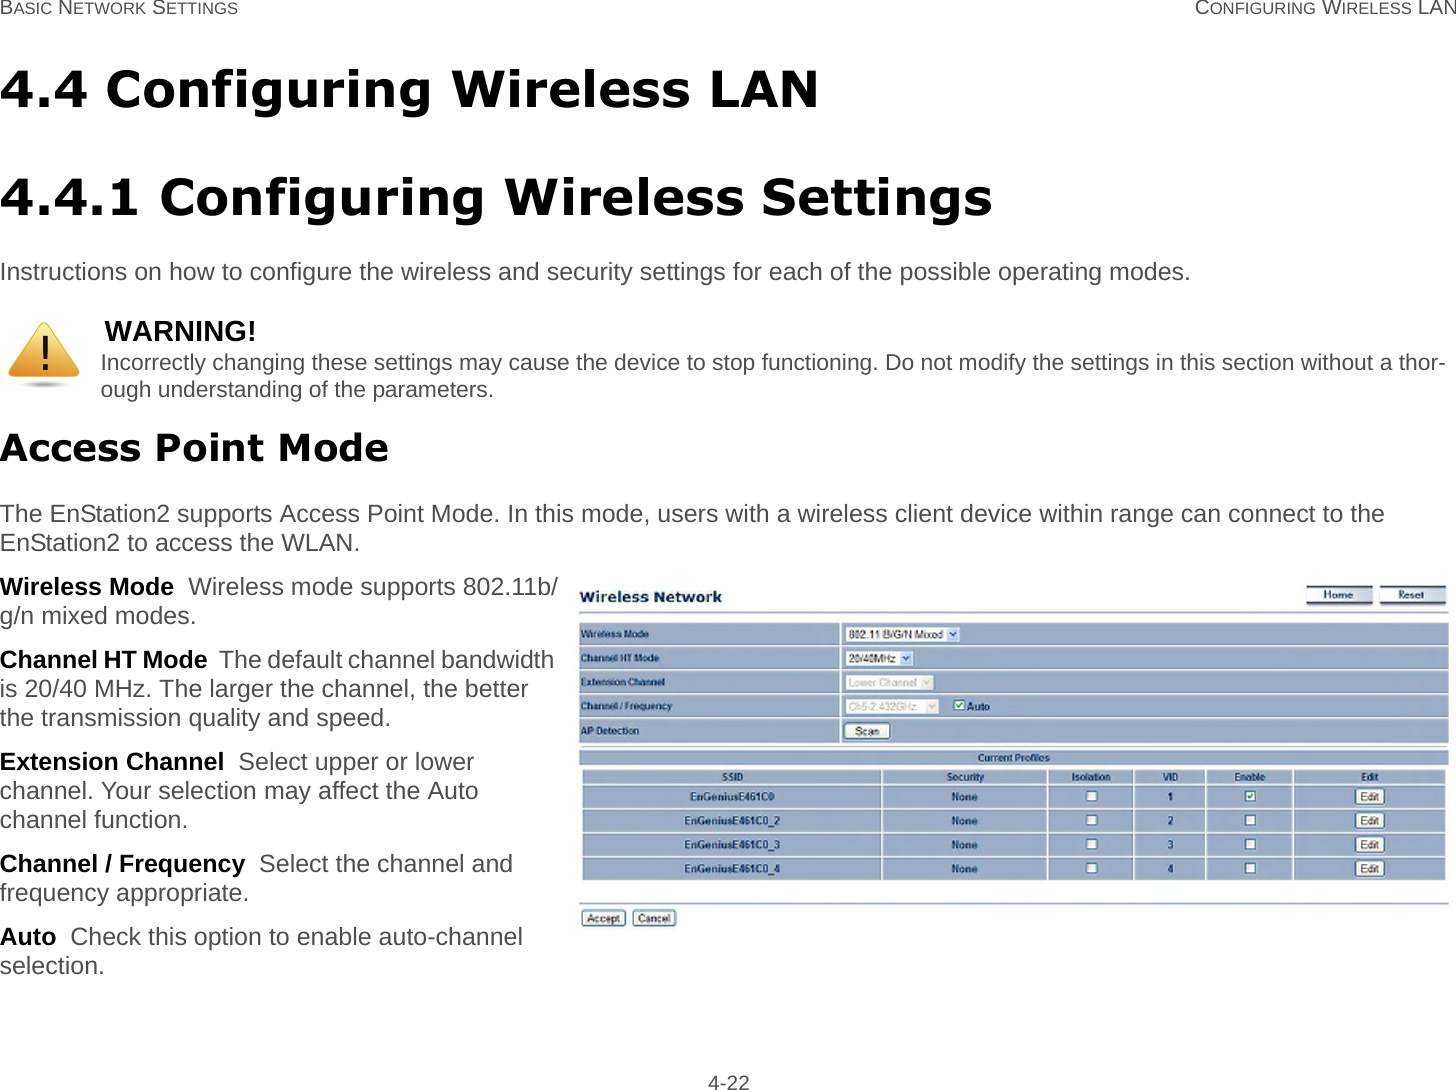 BASIC NETWORK SETTINGS CONFIGURING WIRELESS LAN 4-224.4 Configuring Wireless LAN4.4.1 Configuring Wireless SettingsInstructions on how to configure the wireless and security settings for each of the possible operating modes.Access Point ModeThe EnStation2 supports Access Point Mode. In this mode, users with a wireless client device within range can connect to the EnStation2 to access the WLAN.Wireless Mode  Wireless mode supports 802.11b/g/n mixed modes.Channel HT Mode  The default channel bandwidth is 20/40 MHz. The larger the channel, the better the transmission quality and speed.Extension Channel  Select upper or lower channel. Your selection may affect the Auto channel function.Channel / Frequency  Select the channel and frequency appropriate.Auto  Check this option to enable auto-channel selection.WARNING!Incorrectly changing these settings may cause the device to stop functioning. Do not modify the settings in this section without a thor-ough understanding of the parameters.!